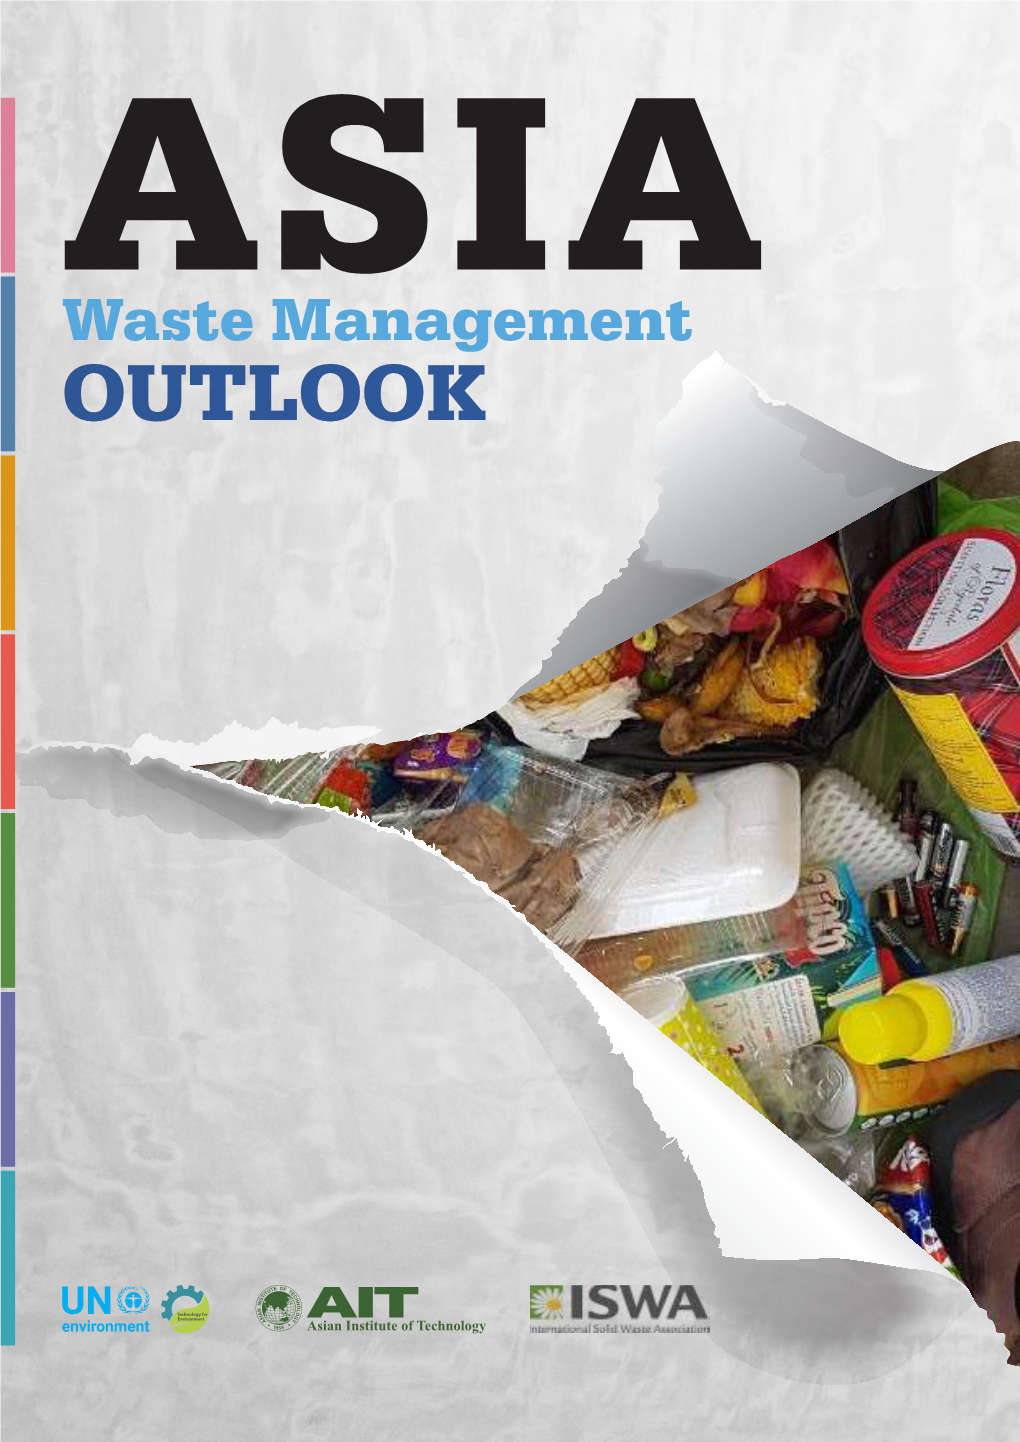 ASIA Waste Management OUTLOOK © United Nations Environment Programme, 2017